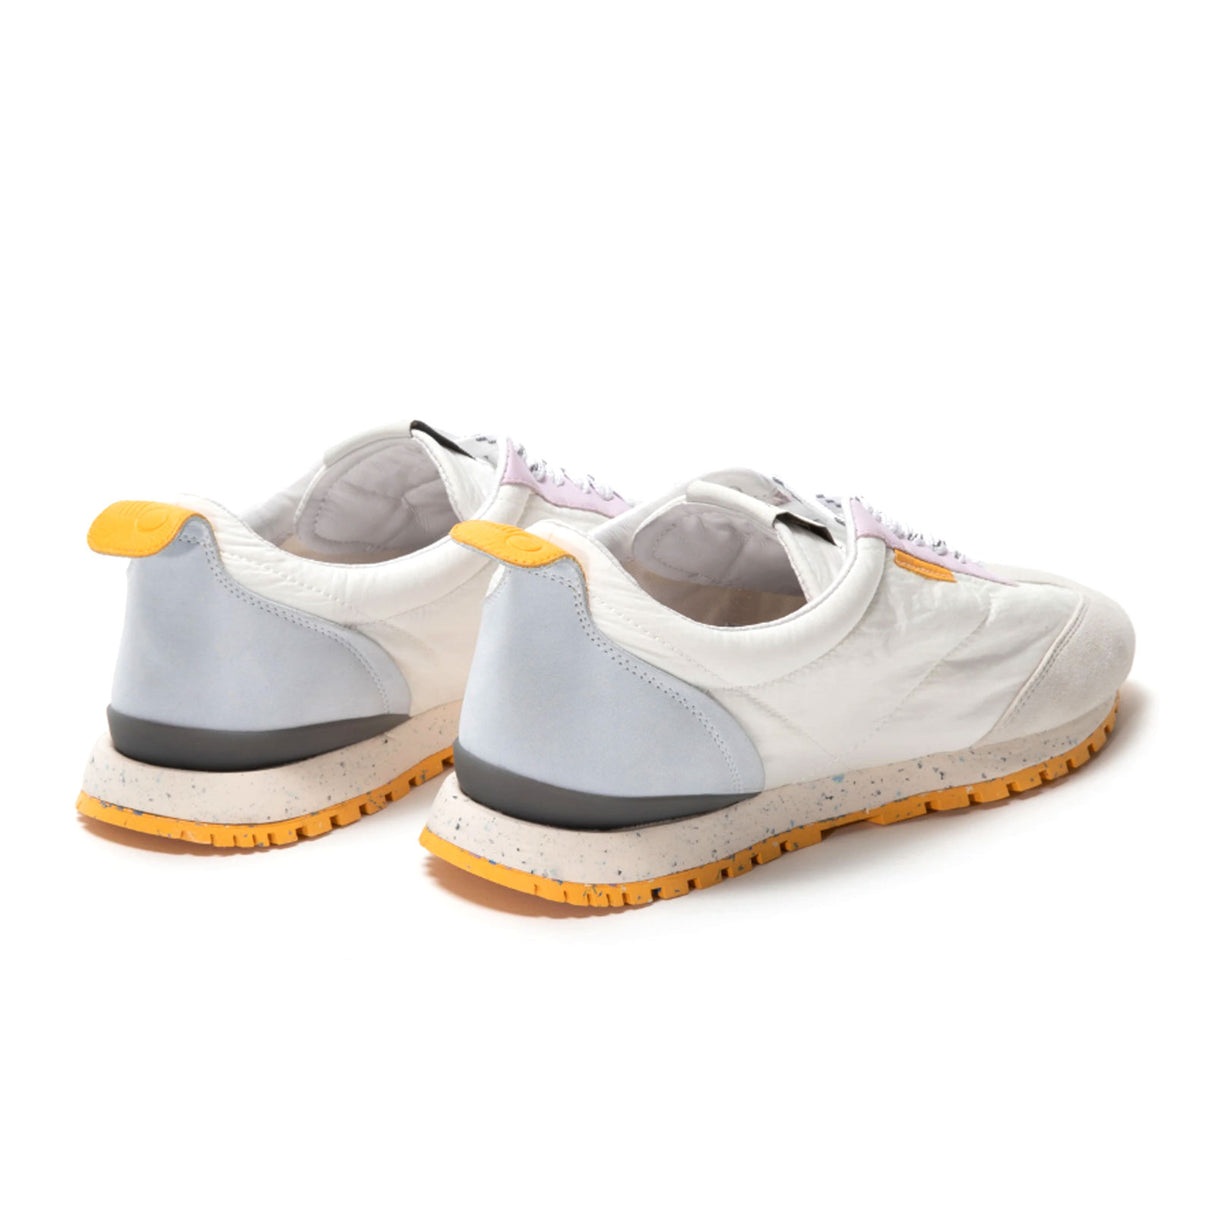 Oncept Tokyo Sneaker (Women) - White Cloud Multi Athletic - Casual - Lace Up - The Heel Shoe Fitters